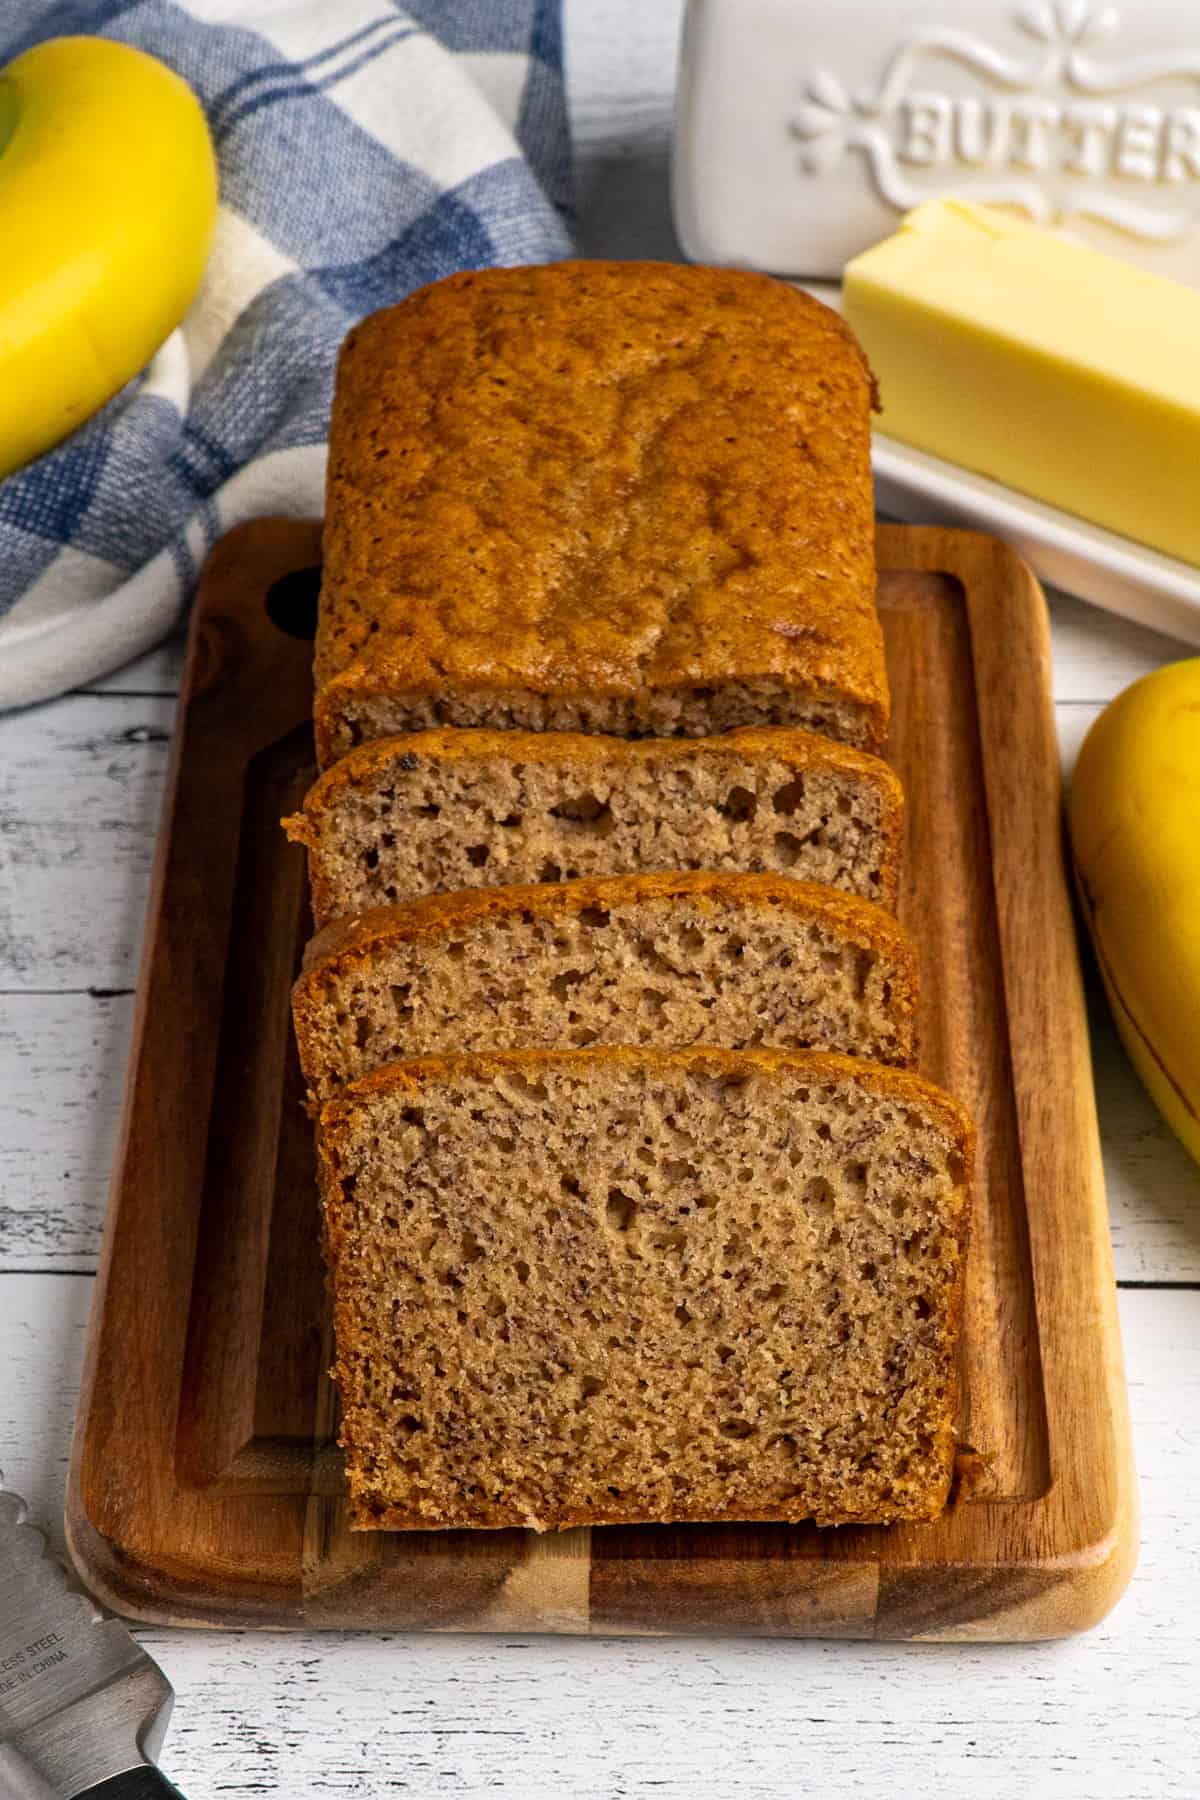 Banana bread on a wood cutting board with three slices cut off.